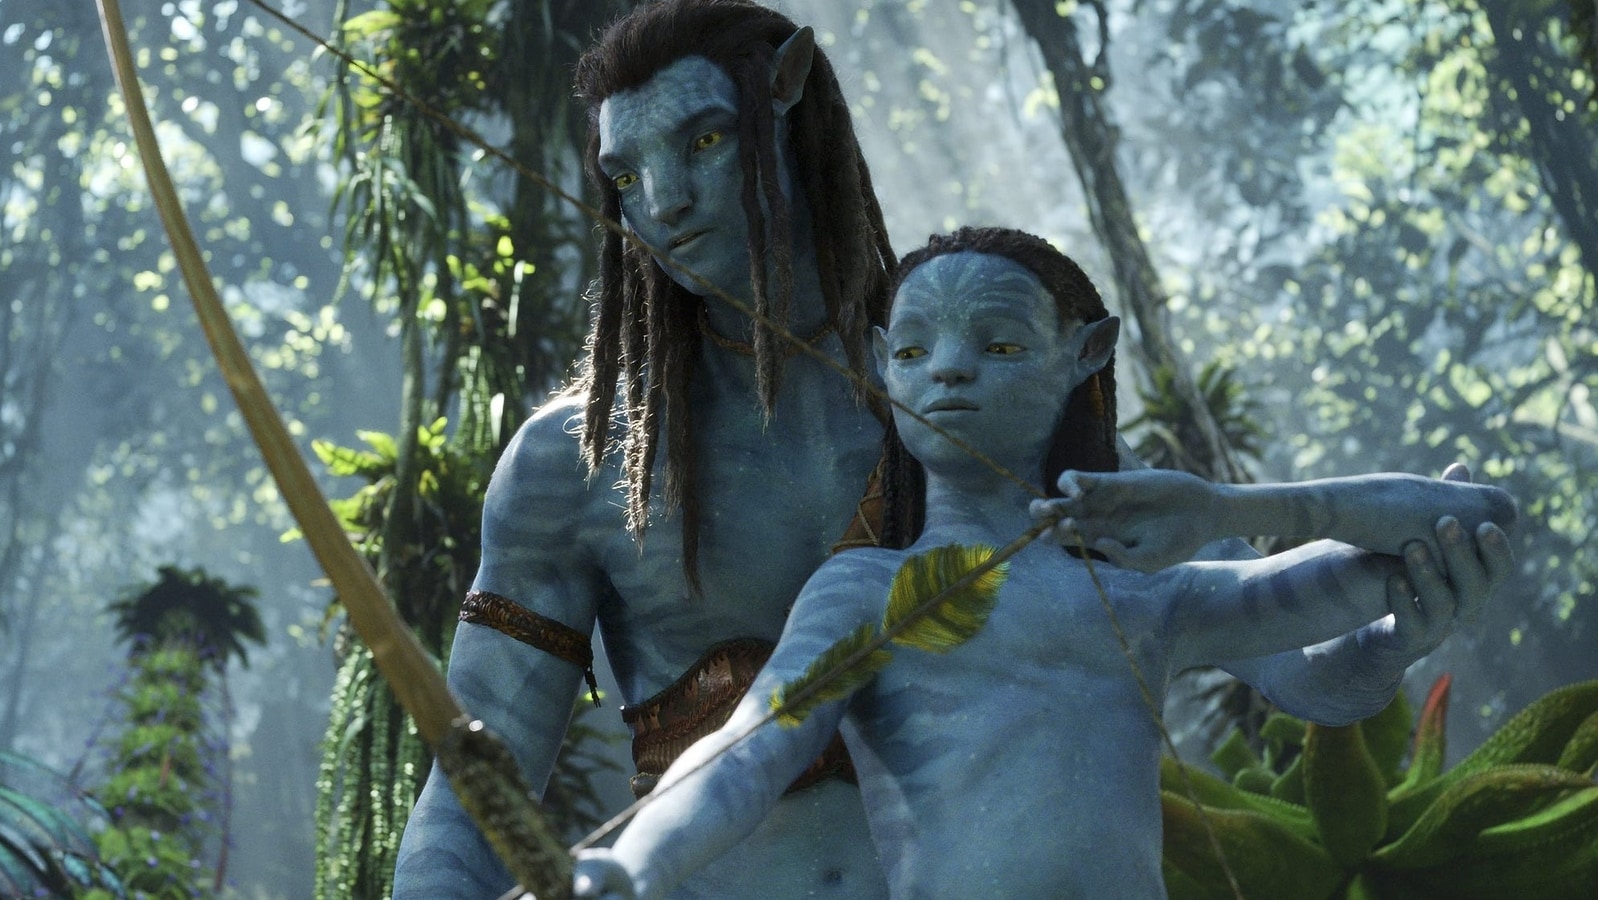 Avatar 2 faces boycott calls from activists for native accusations of racism and culture appropriation